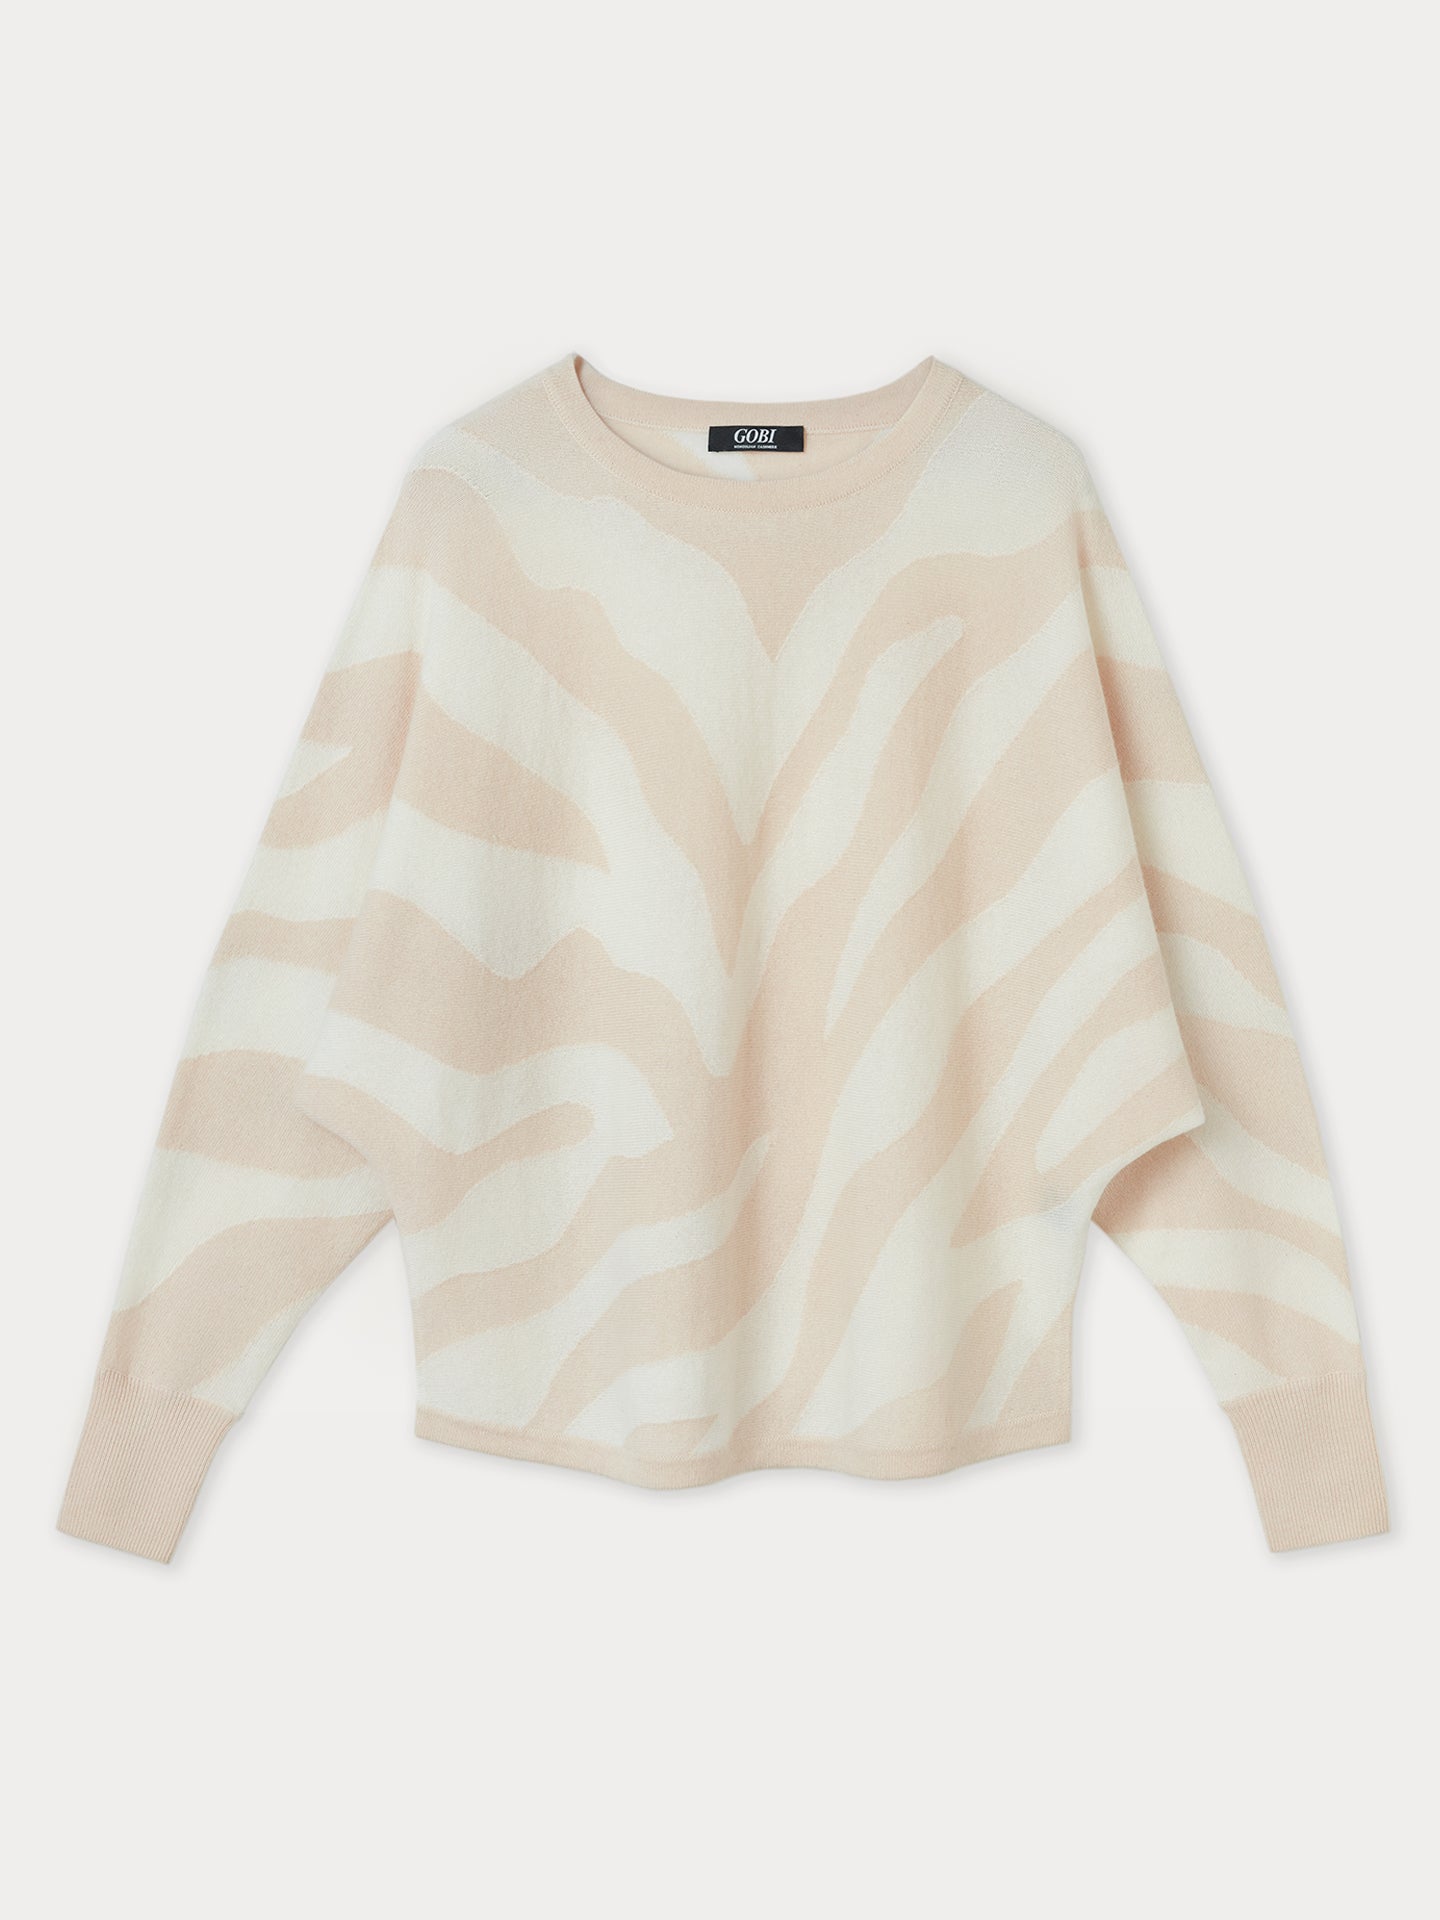 Women's Cashmere Abstract Crew Neck Crème Brulee - Gobi Cashmere